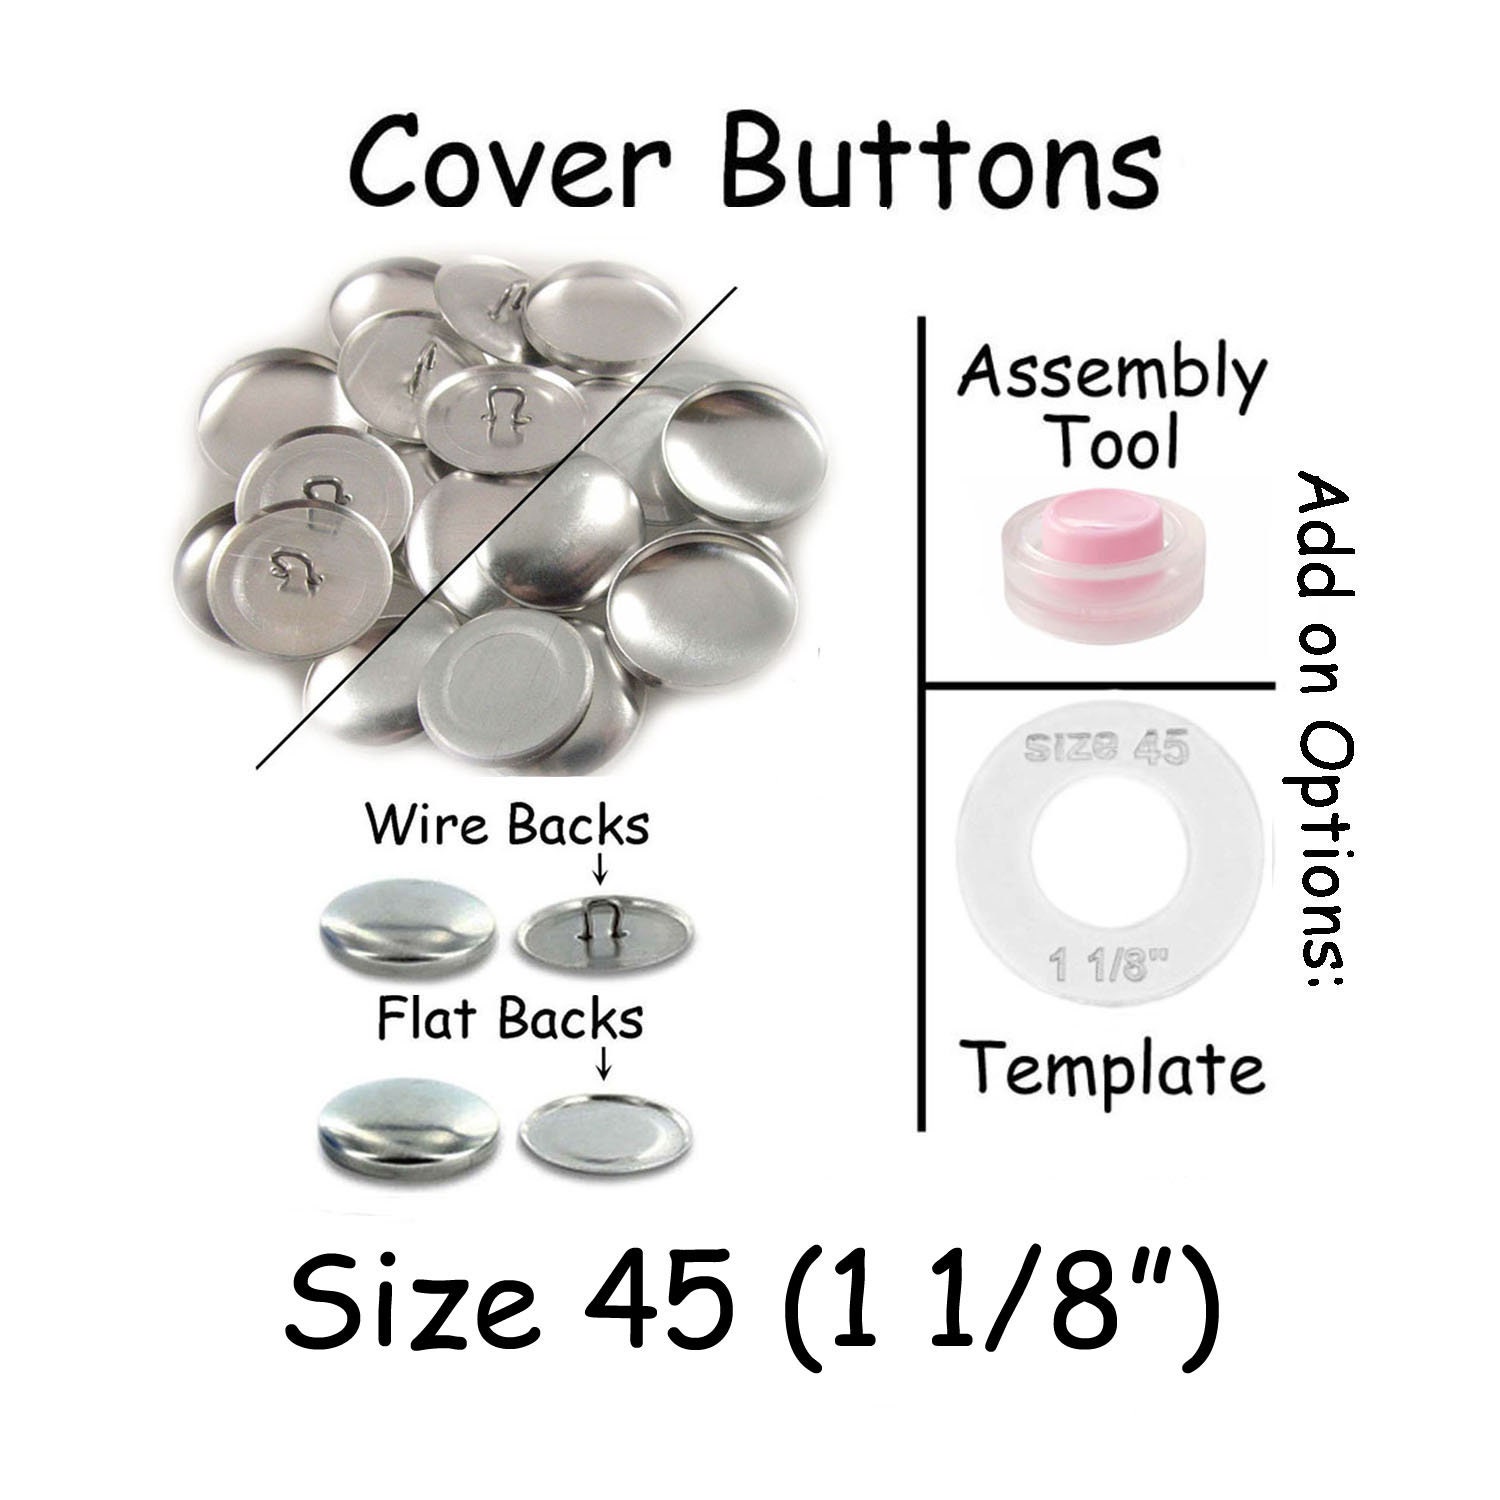 Fabric Covered Button Kit Flat Back Button Covers Kit Covered Button Kit  Cover Buttons Starter Kit